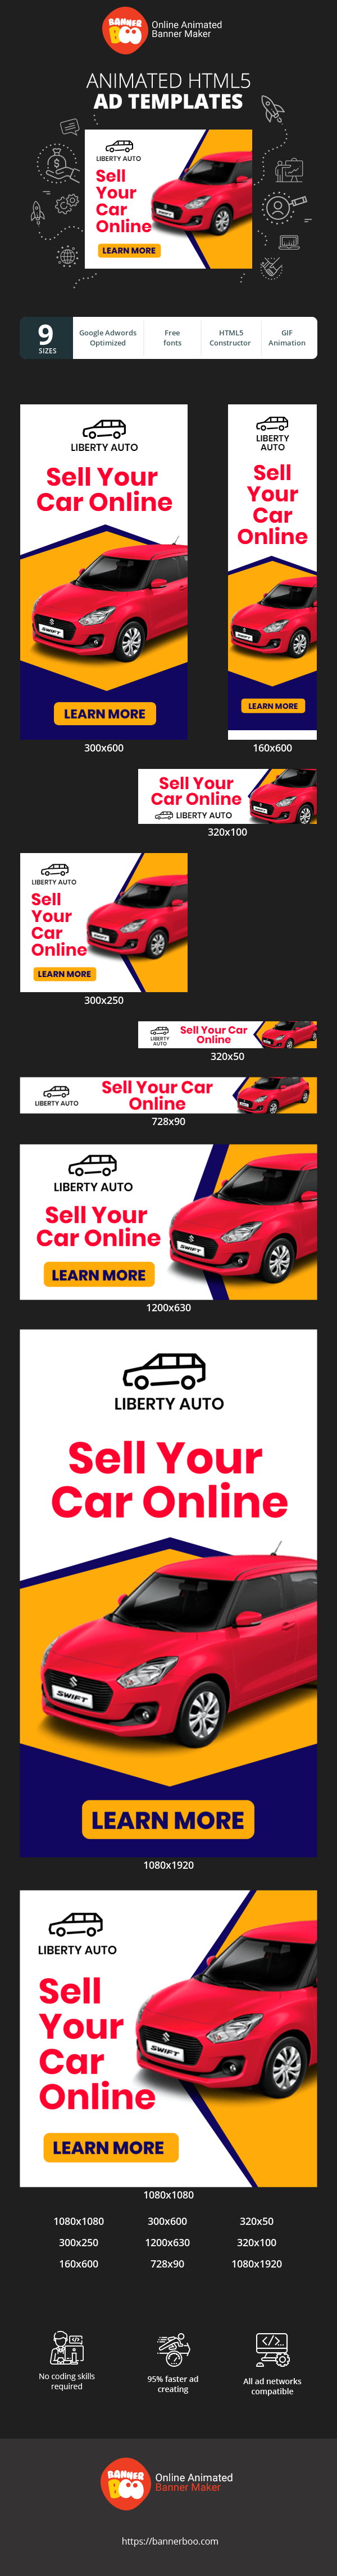 Banner ad template — Sell Your Car Online